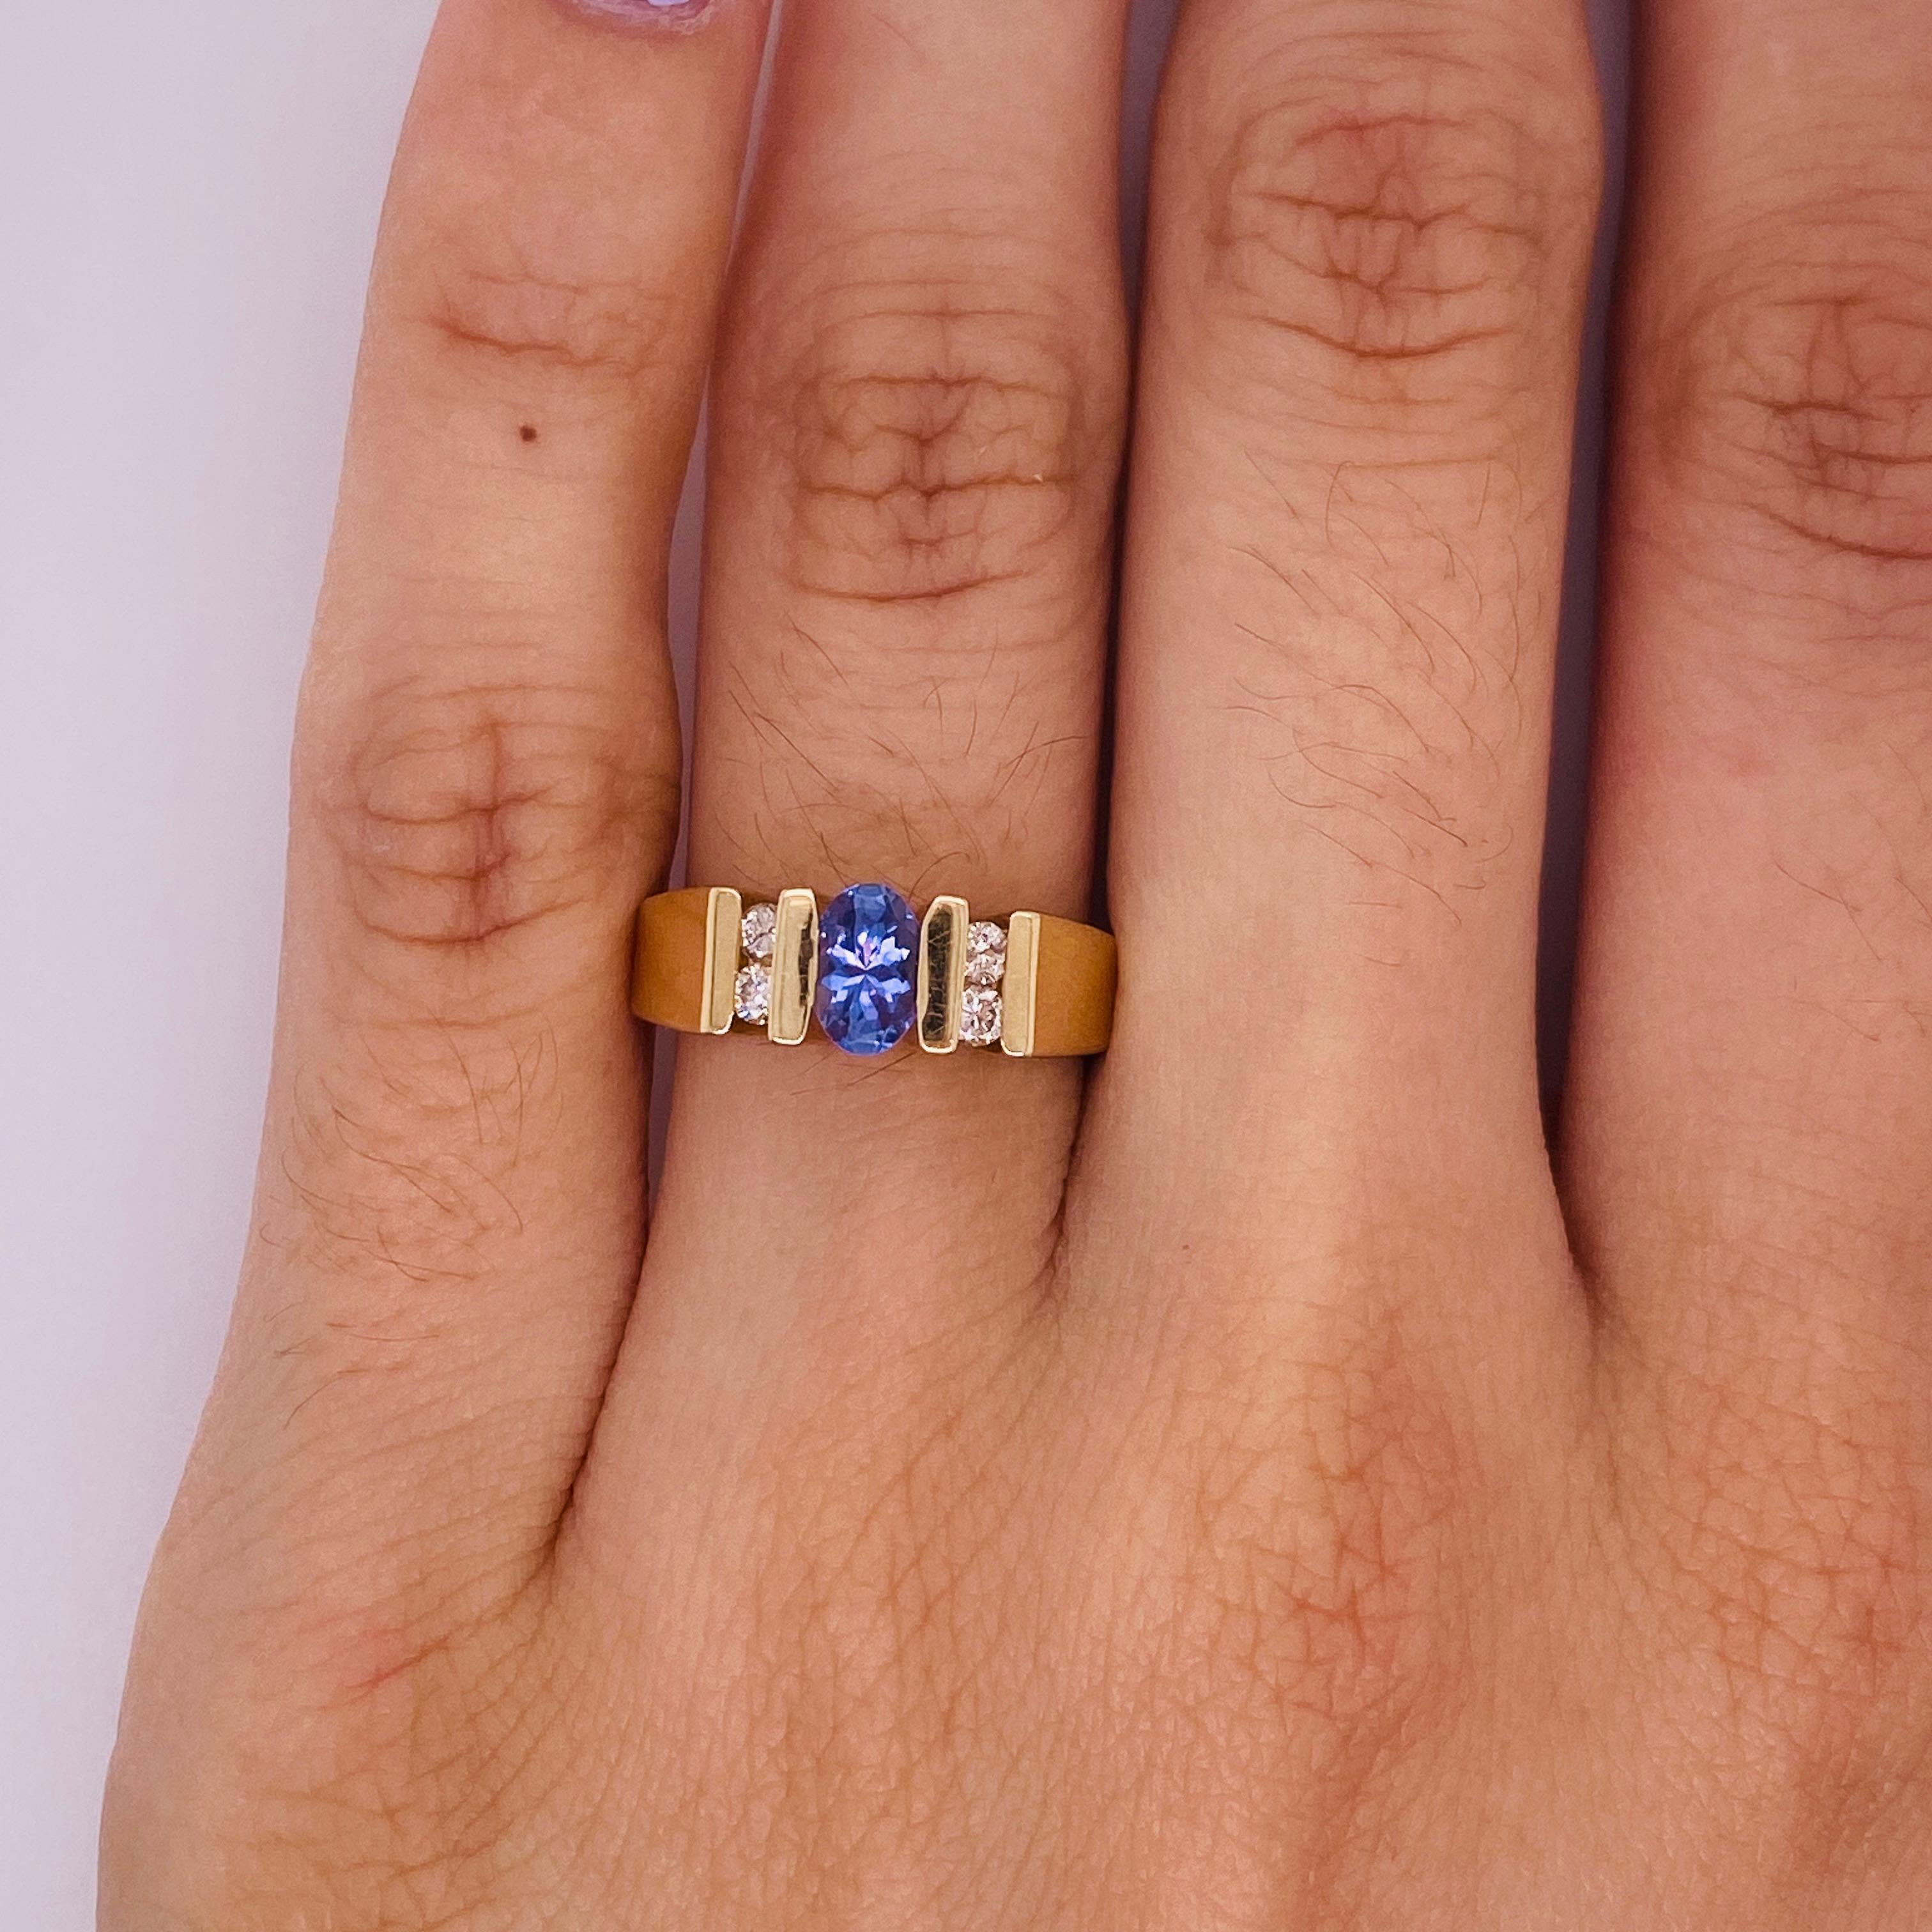 Oval Cut Tanzanite and Diamond Gold Ring in 14k Yellow Gold 0.50 carat Tanzanite For Sale